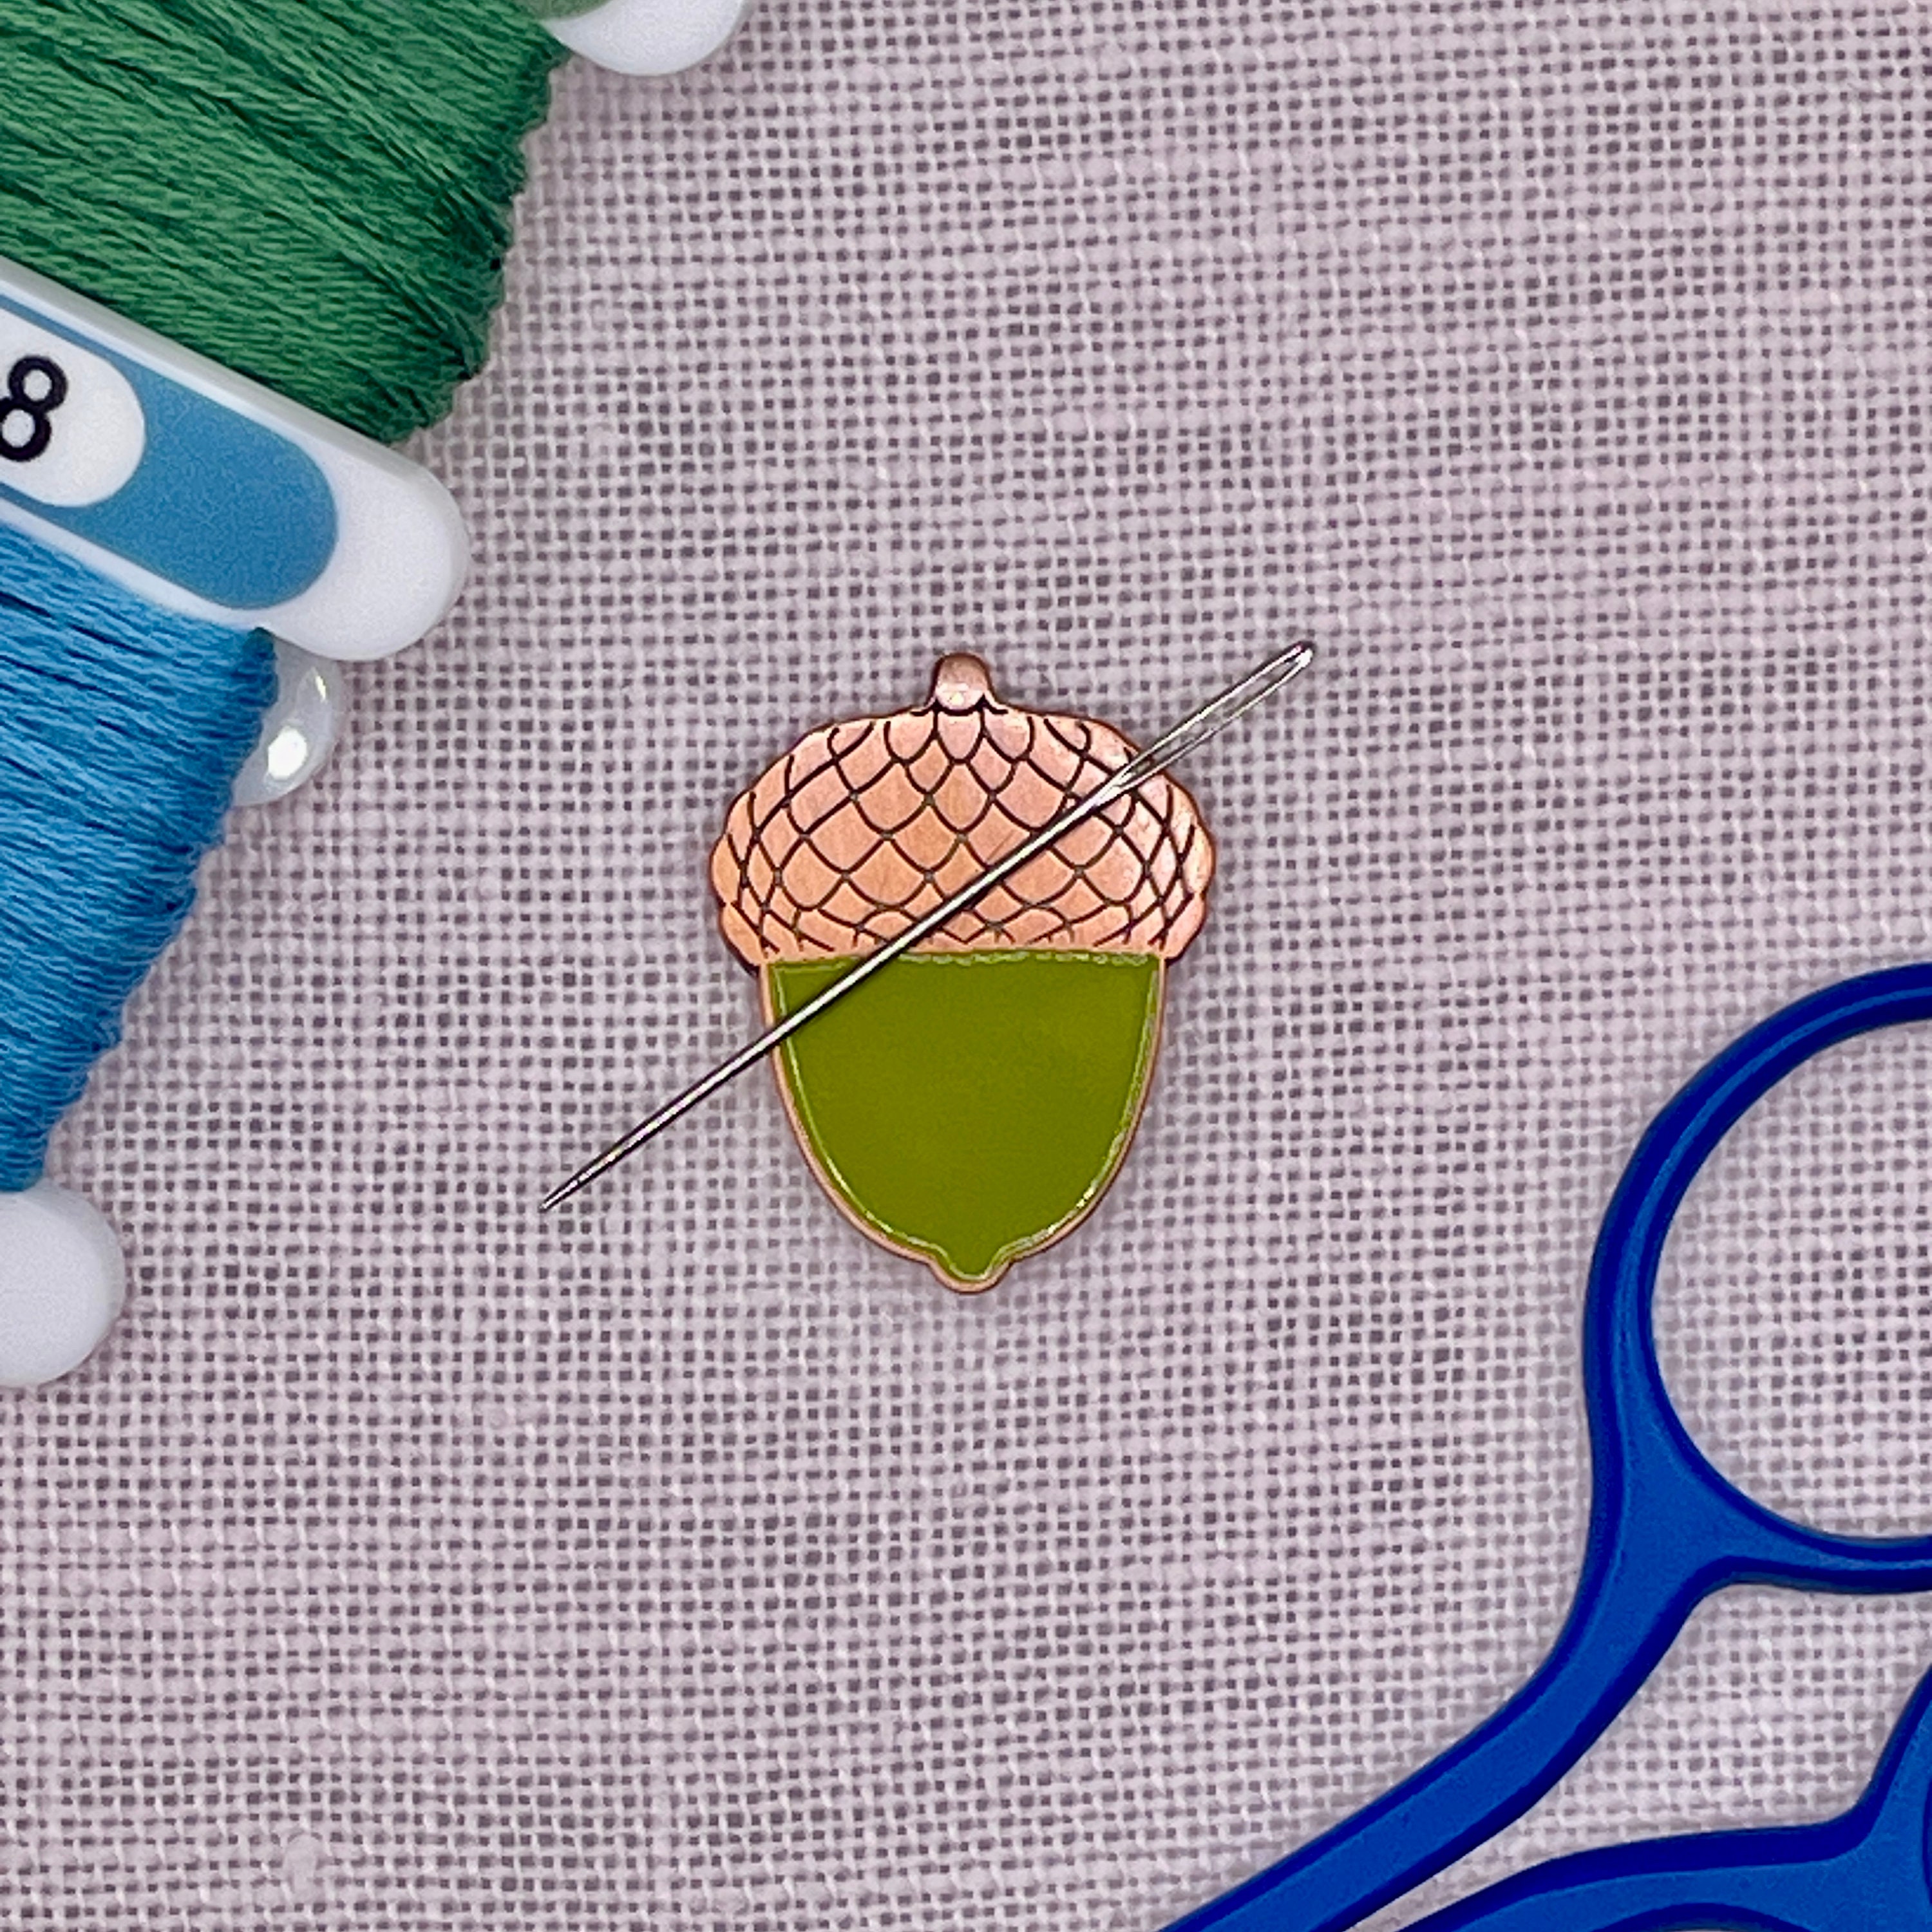 Needle For Micro Stitch - Acorn Picture Framing Supplies Ltd